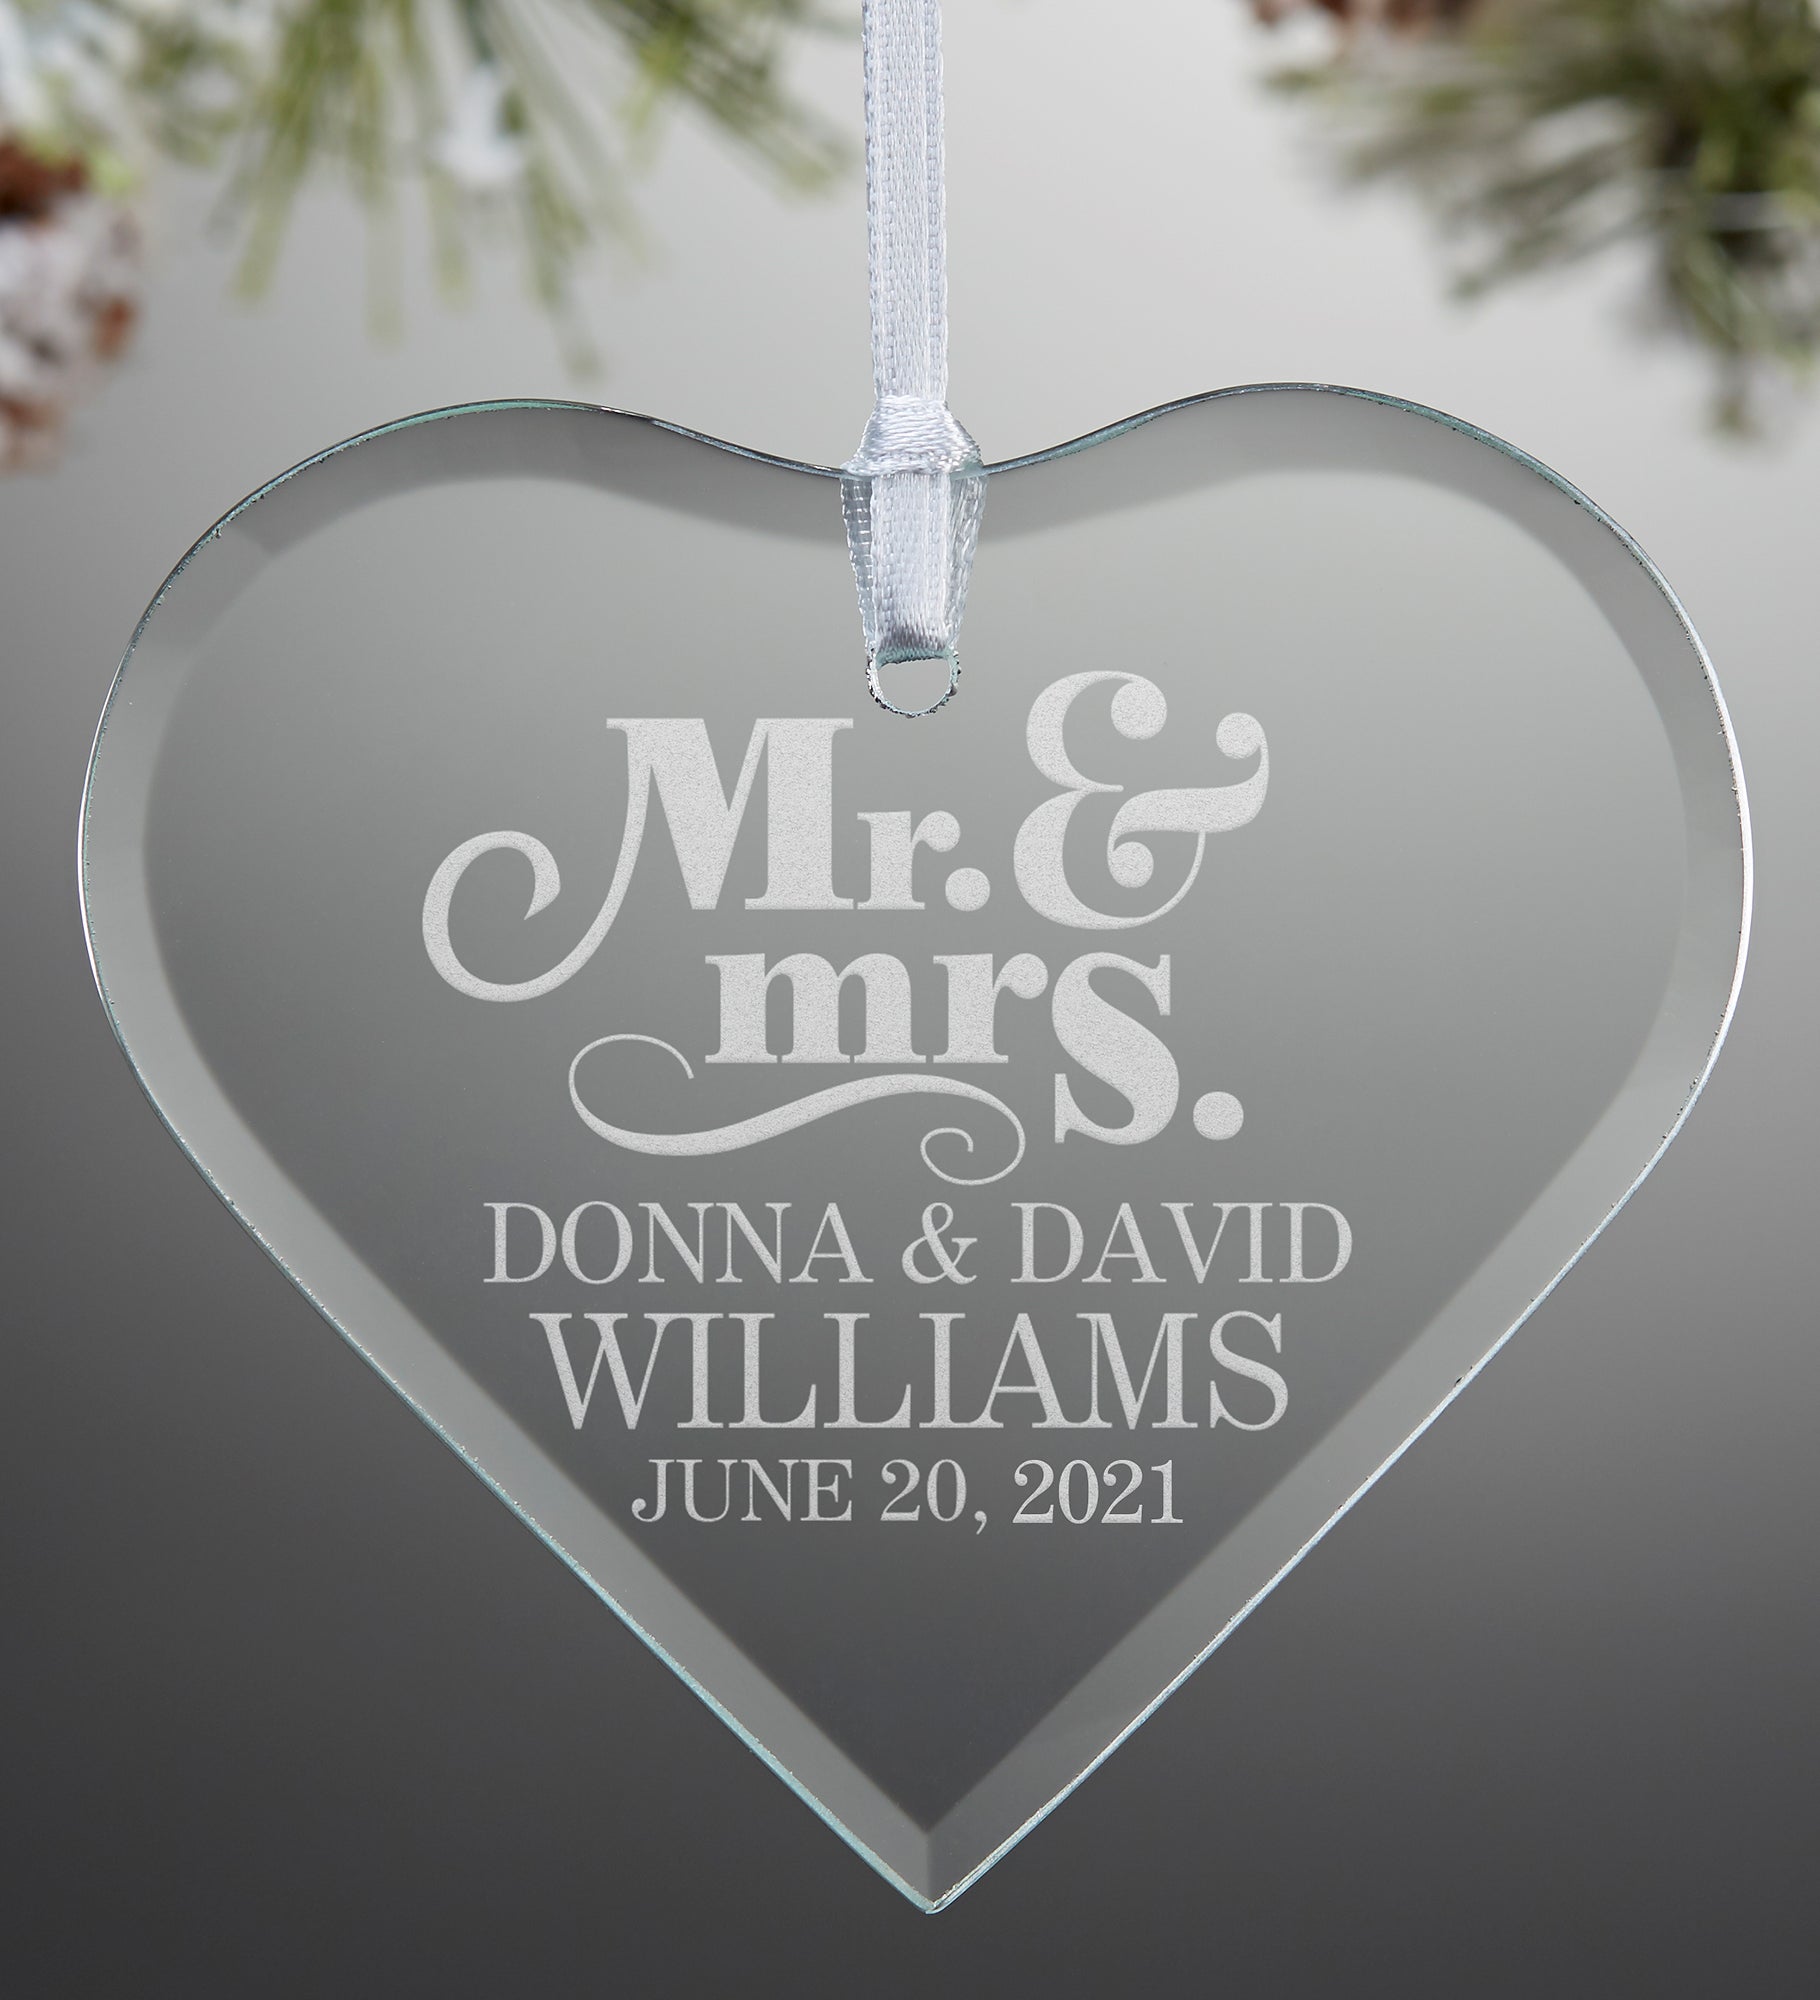 The Happy Couple Personalized Heart Ornament